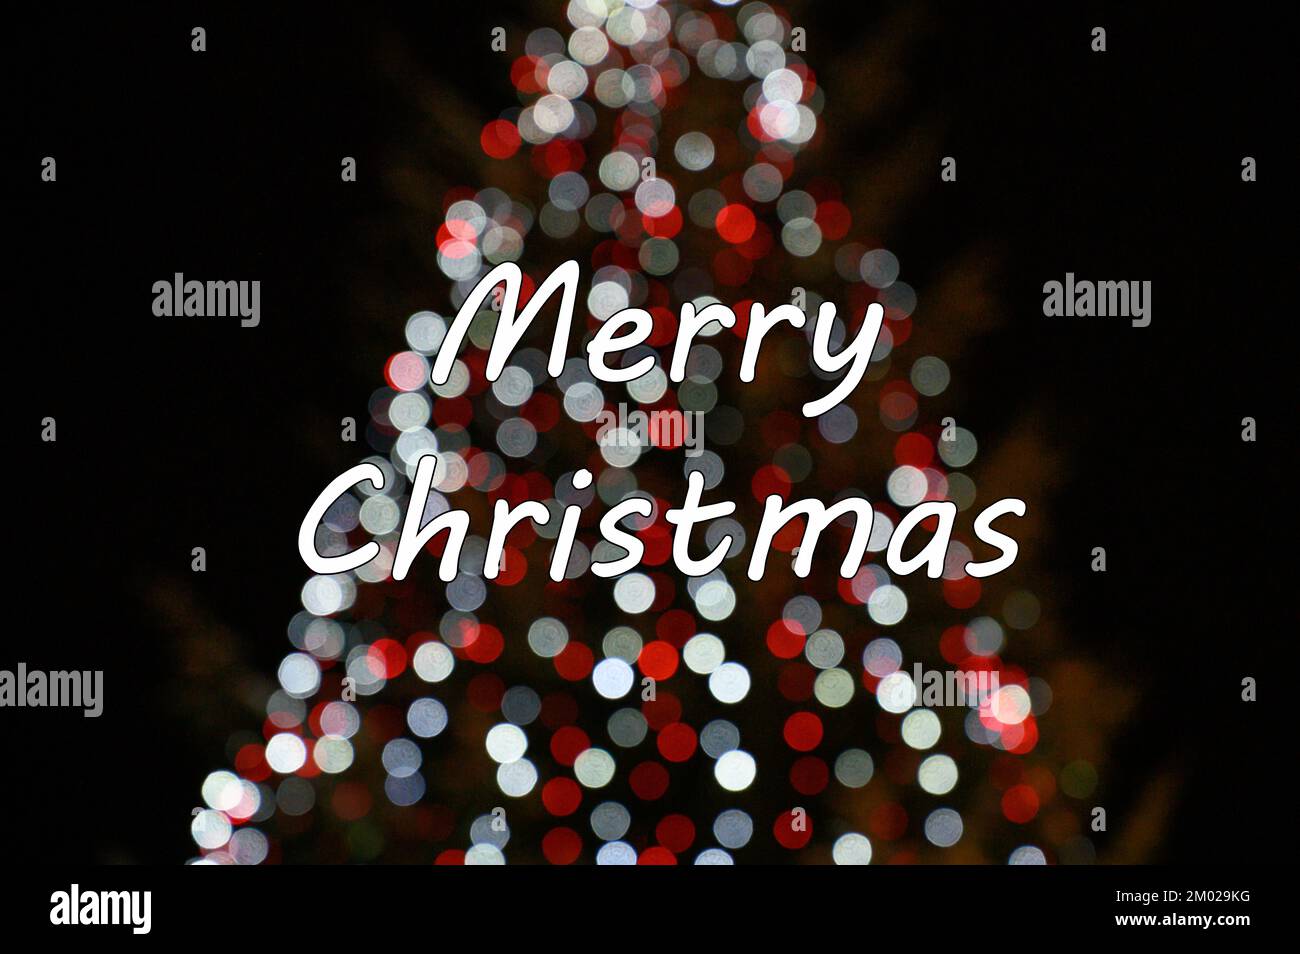 Merry Christmas text card with colorful bokeh background. Stock Photo